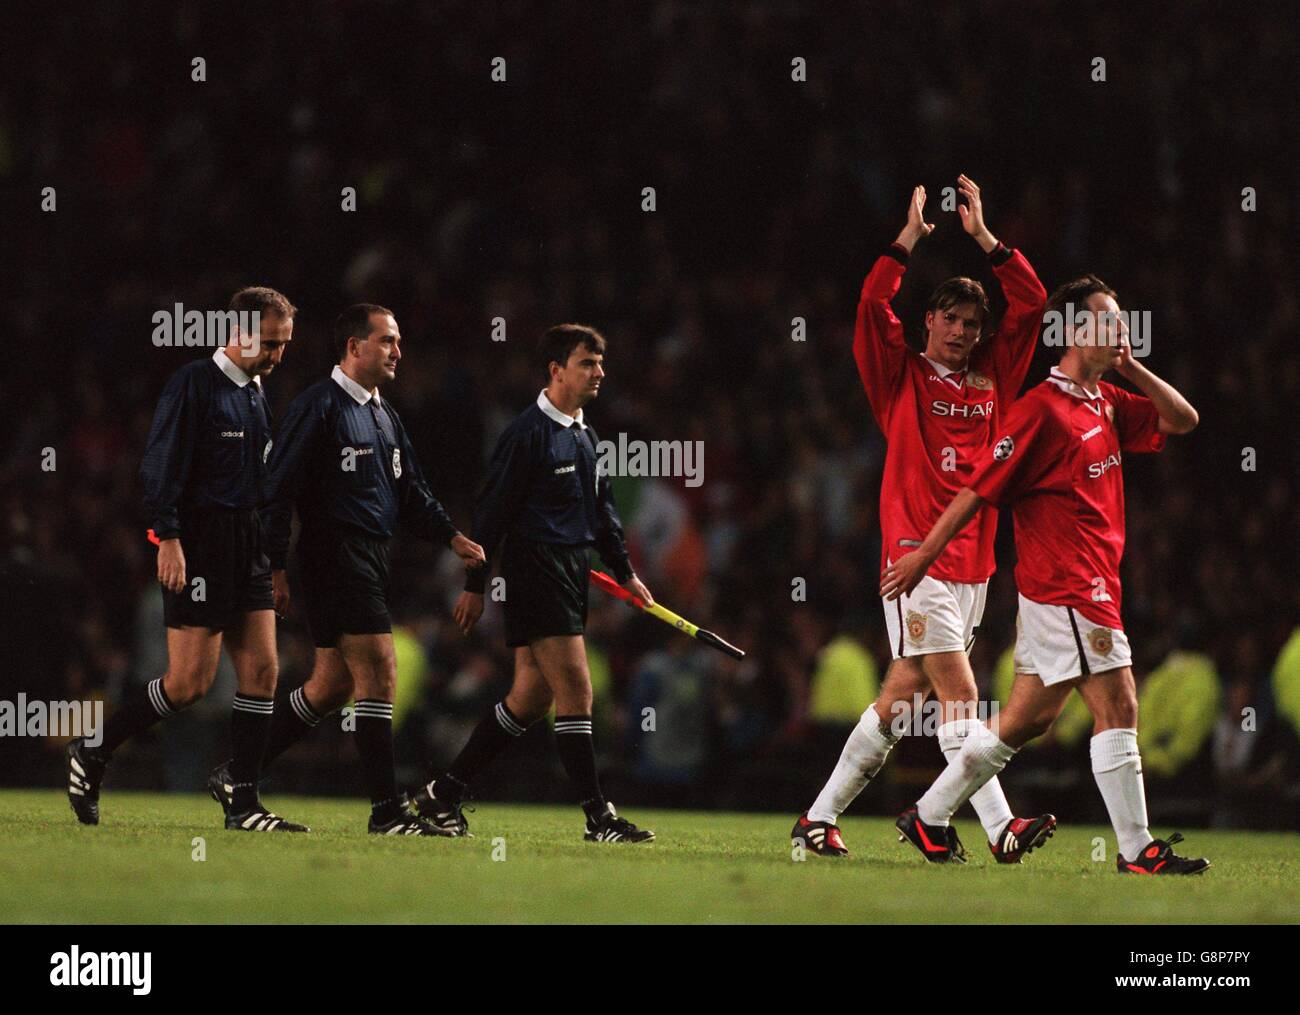 Manchester United's David Beckham (second right) and Gary Neville (right) leave the field followed by the match officials Stock Photo